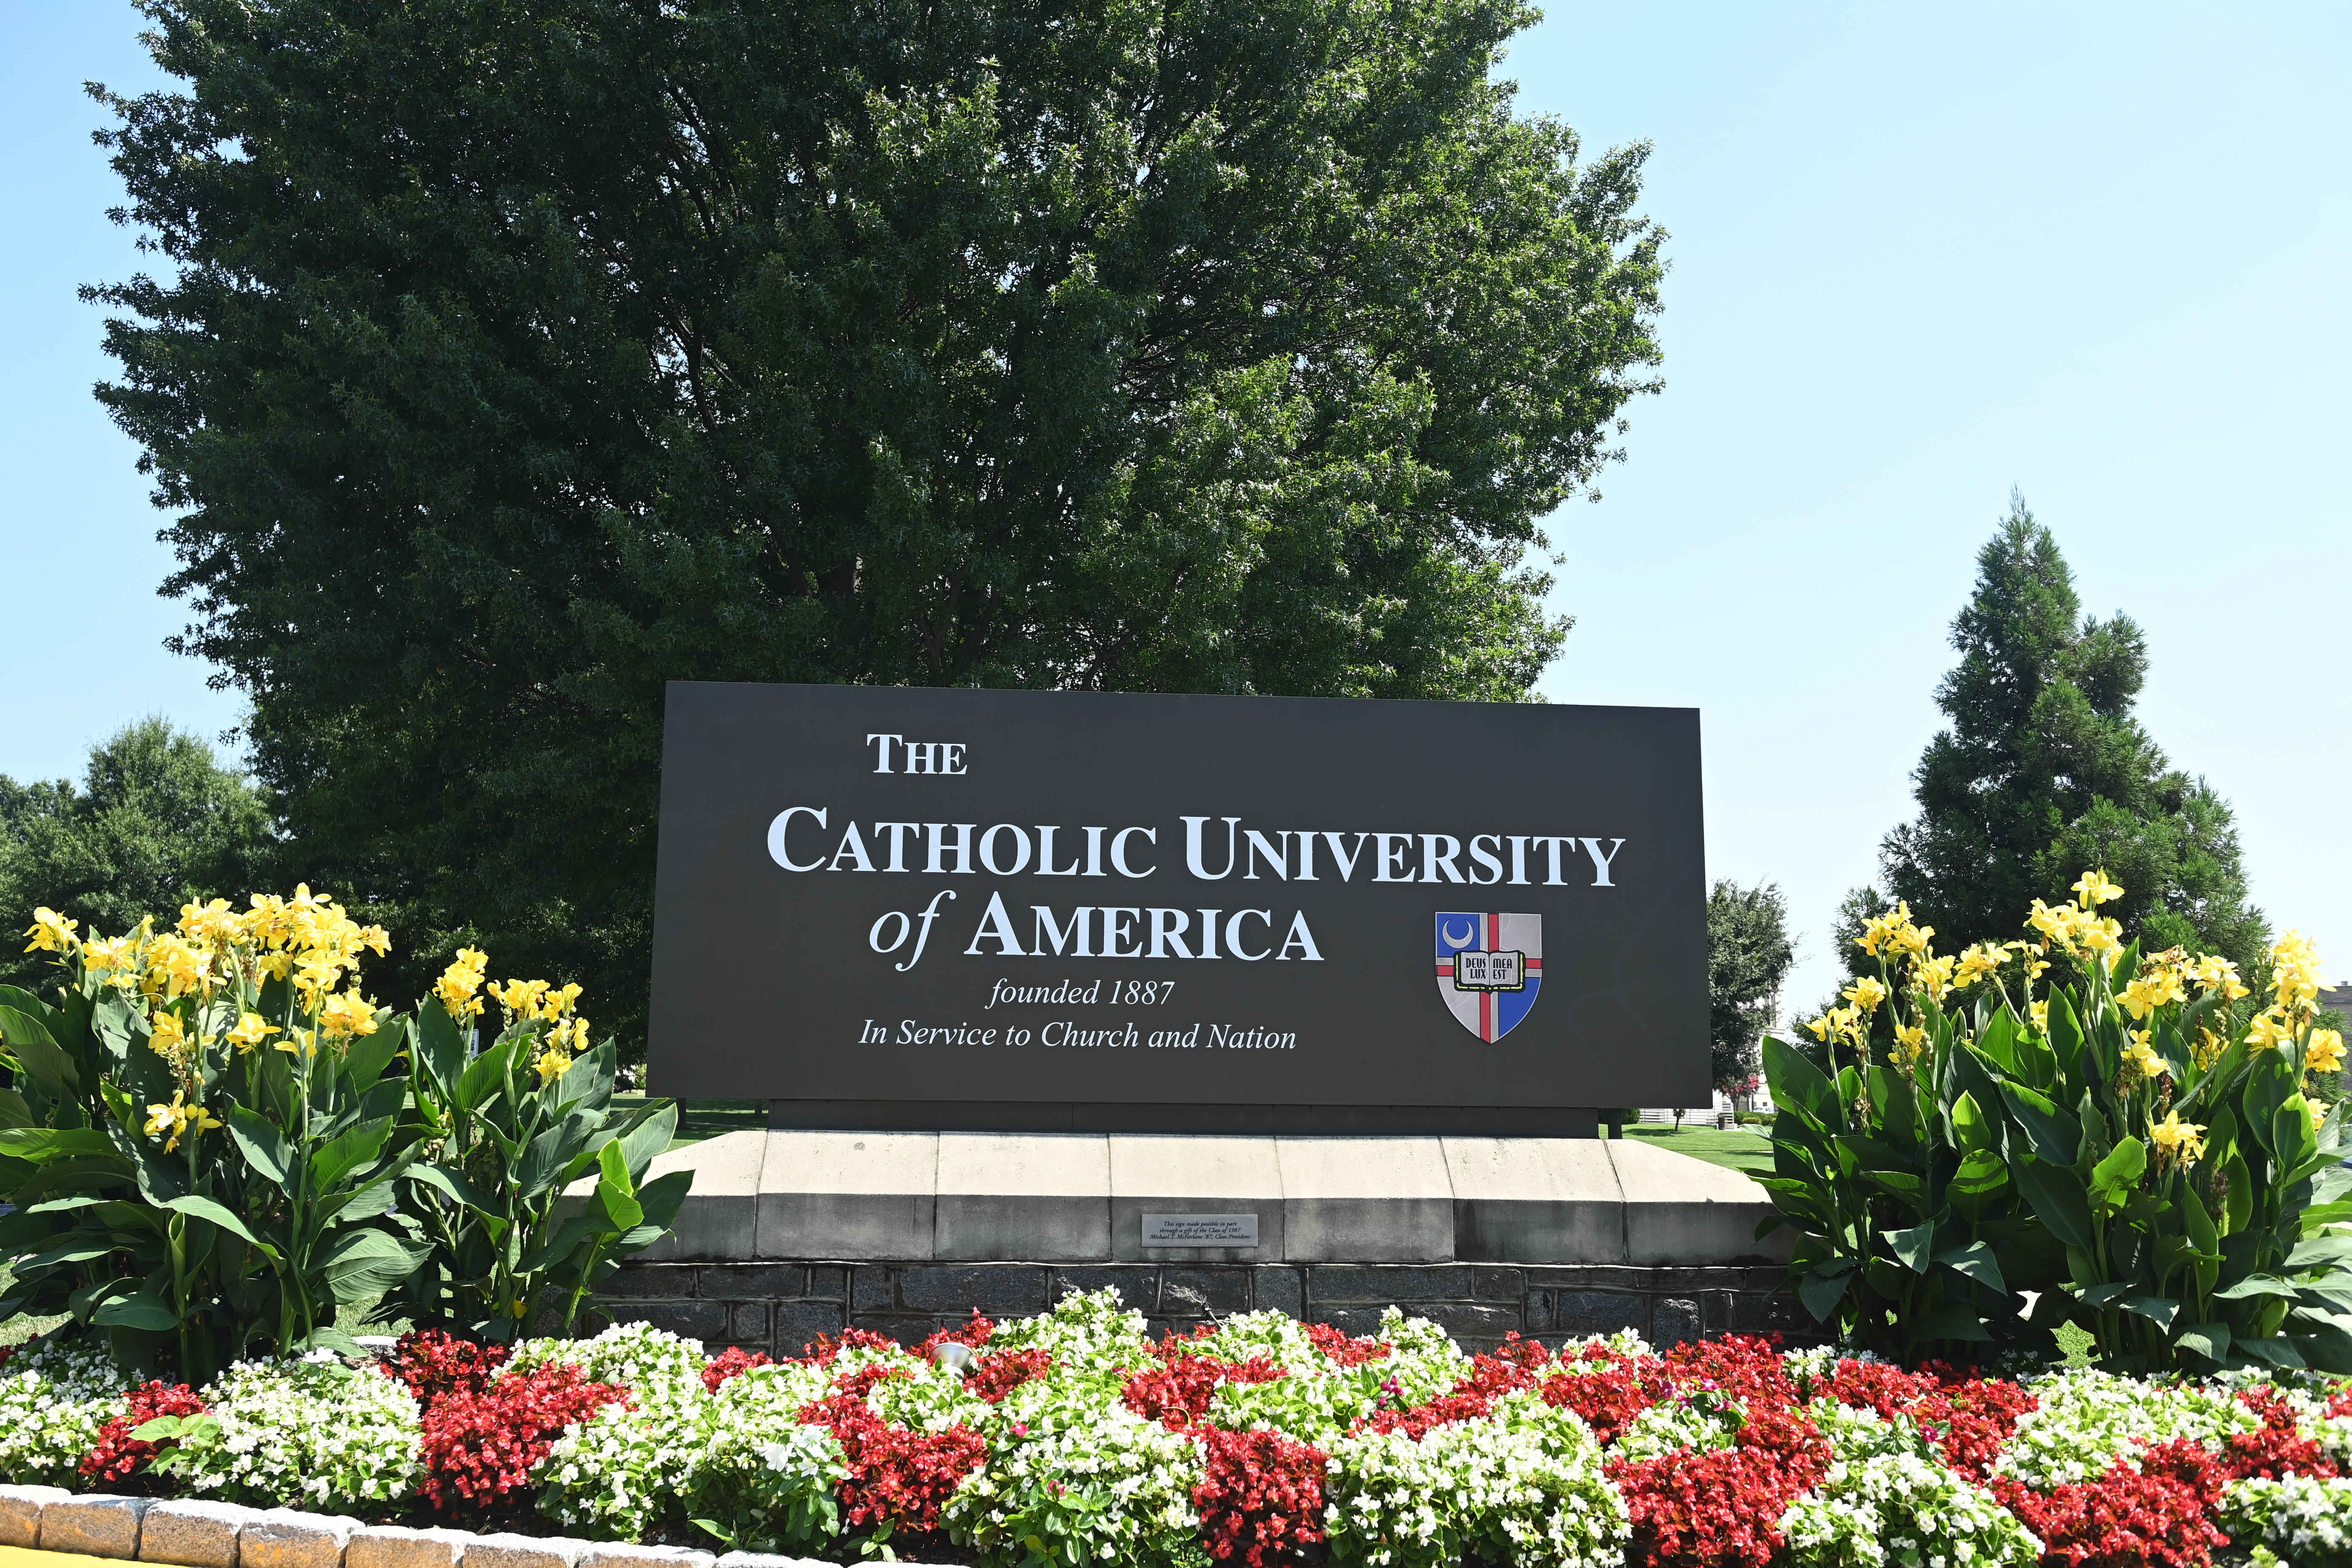 A snapshot of the campus featuring the CUA sign